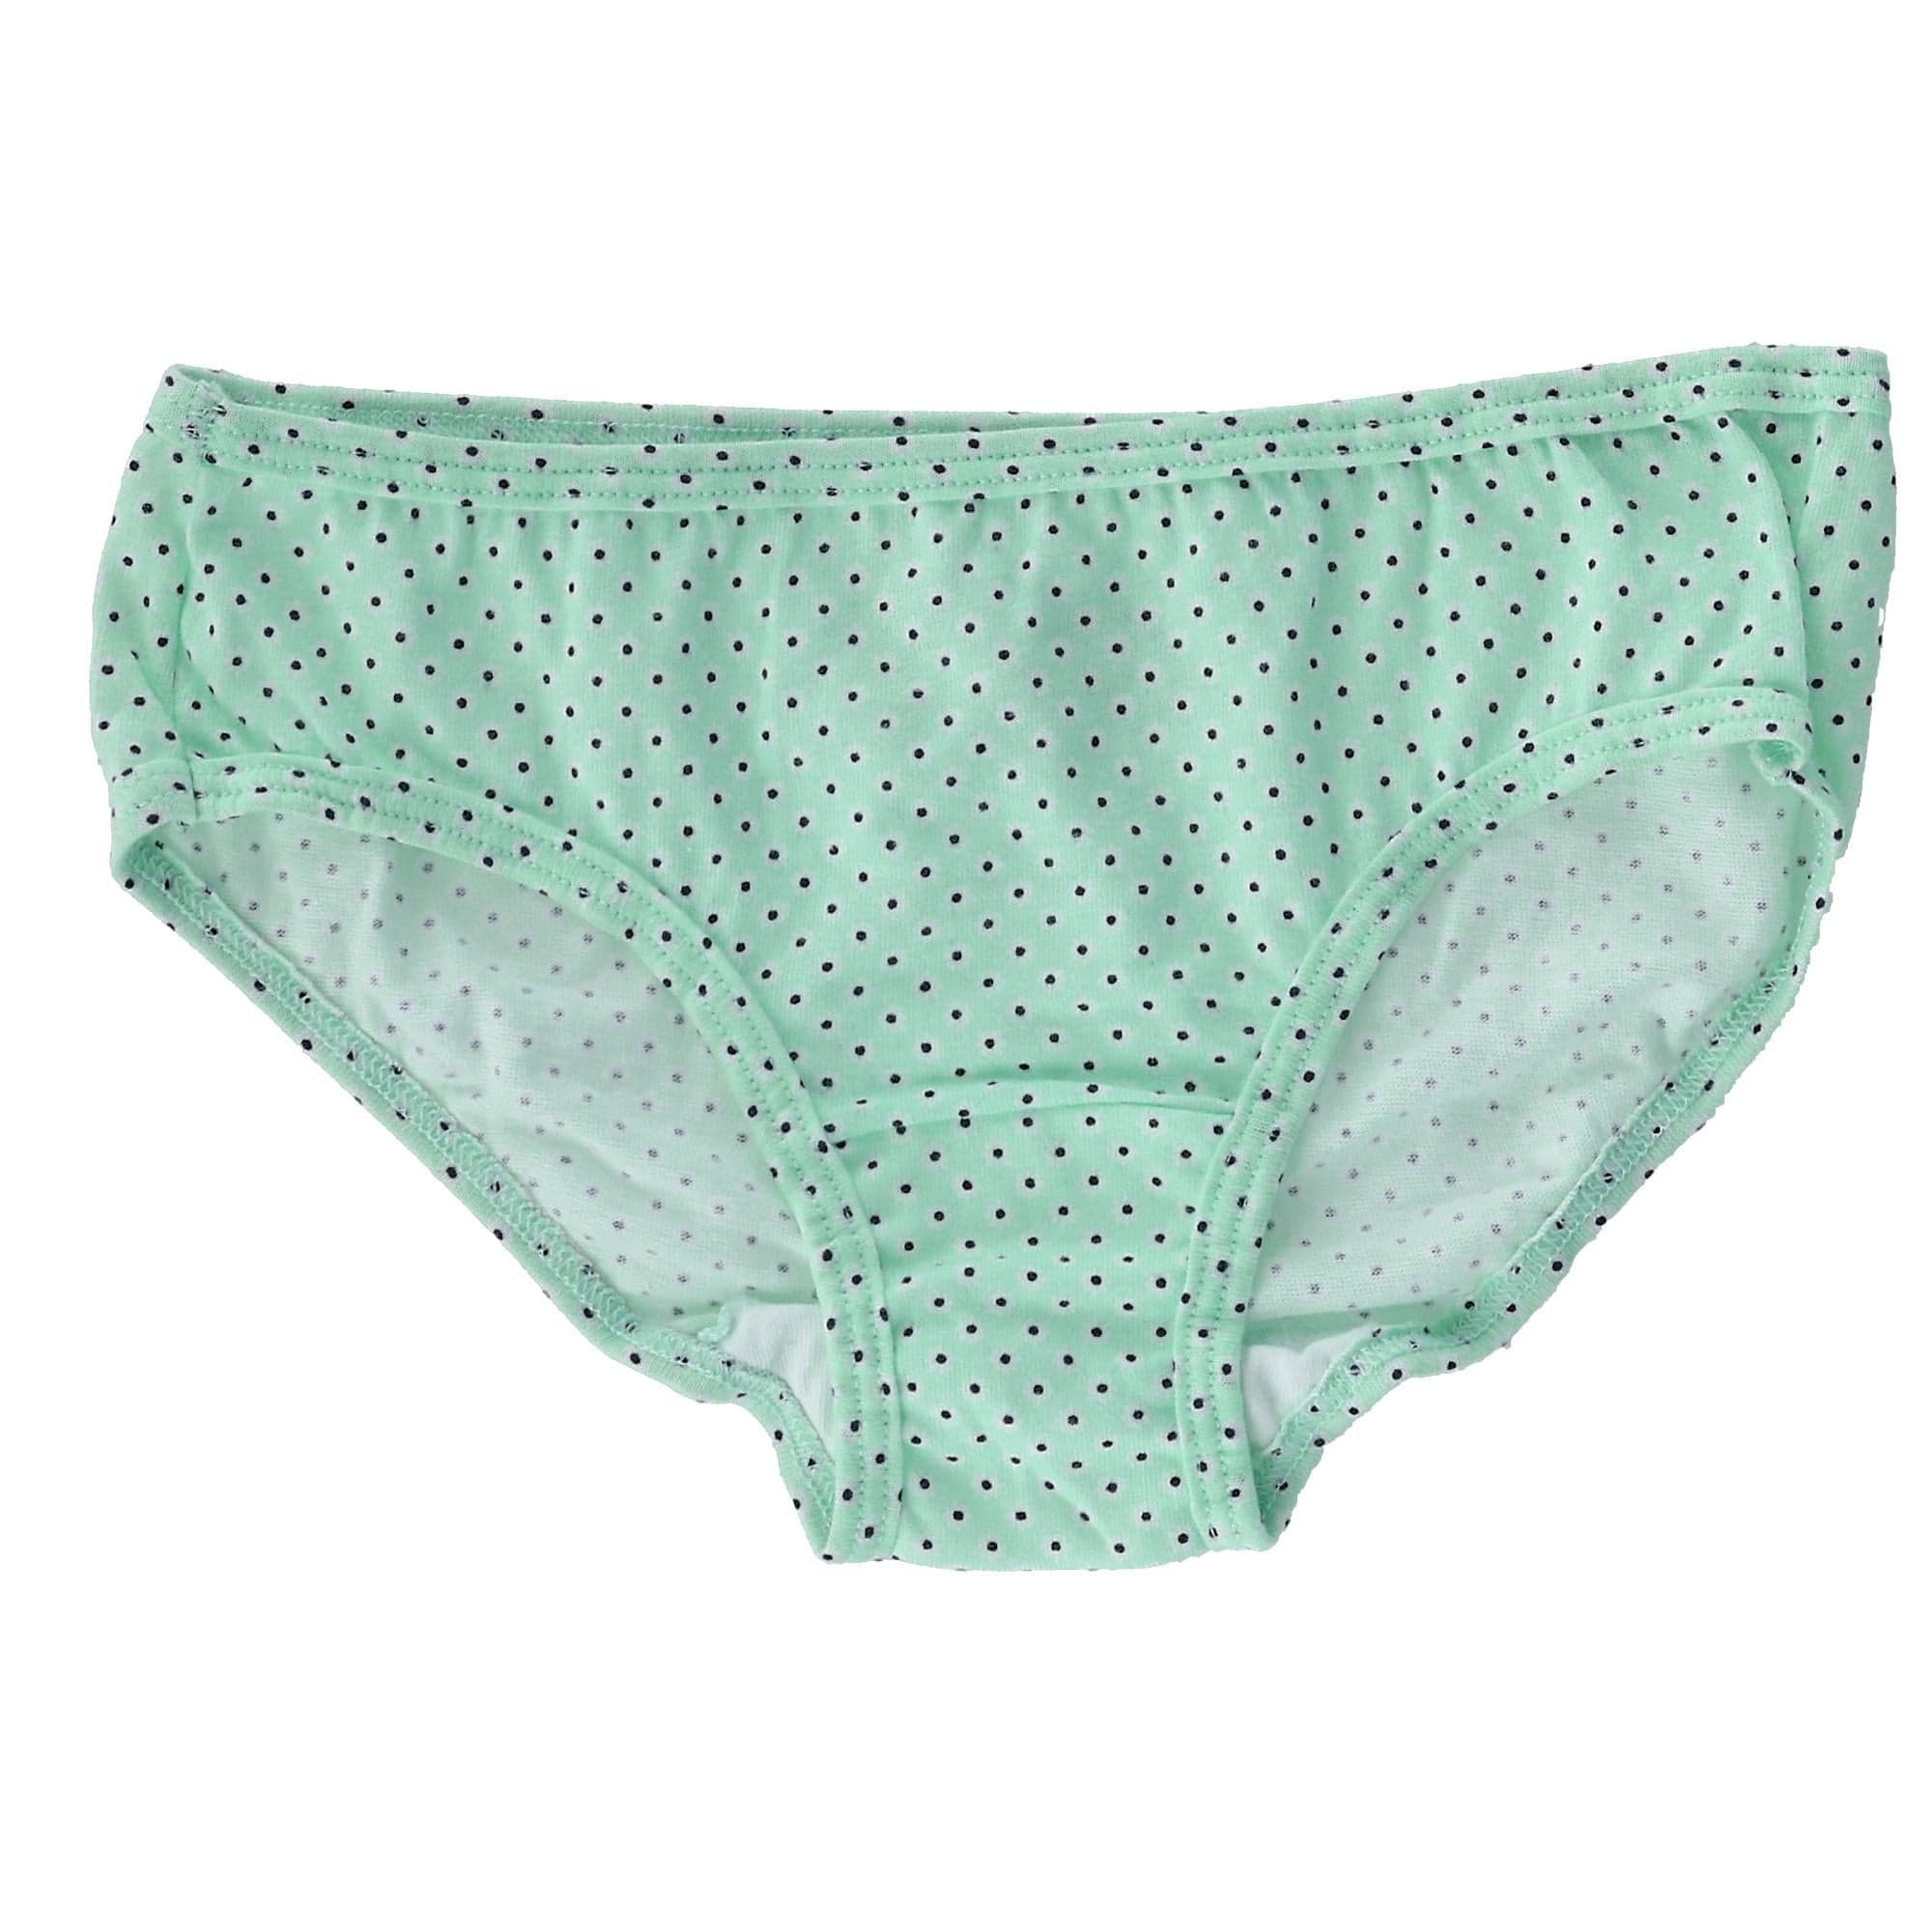 Girl's Hipster Style Underwear (10 Pack) by Fruit of the Loom